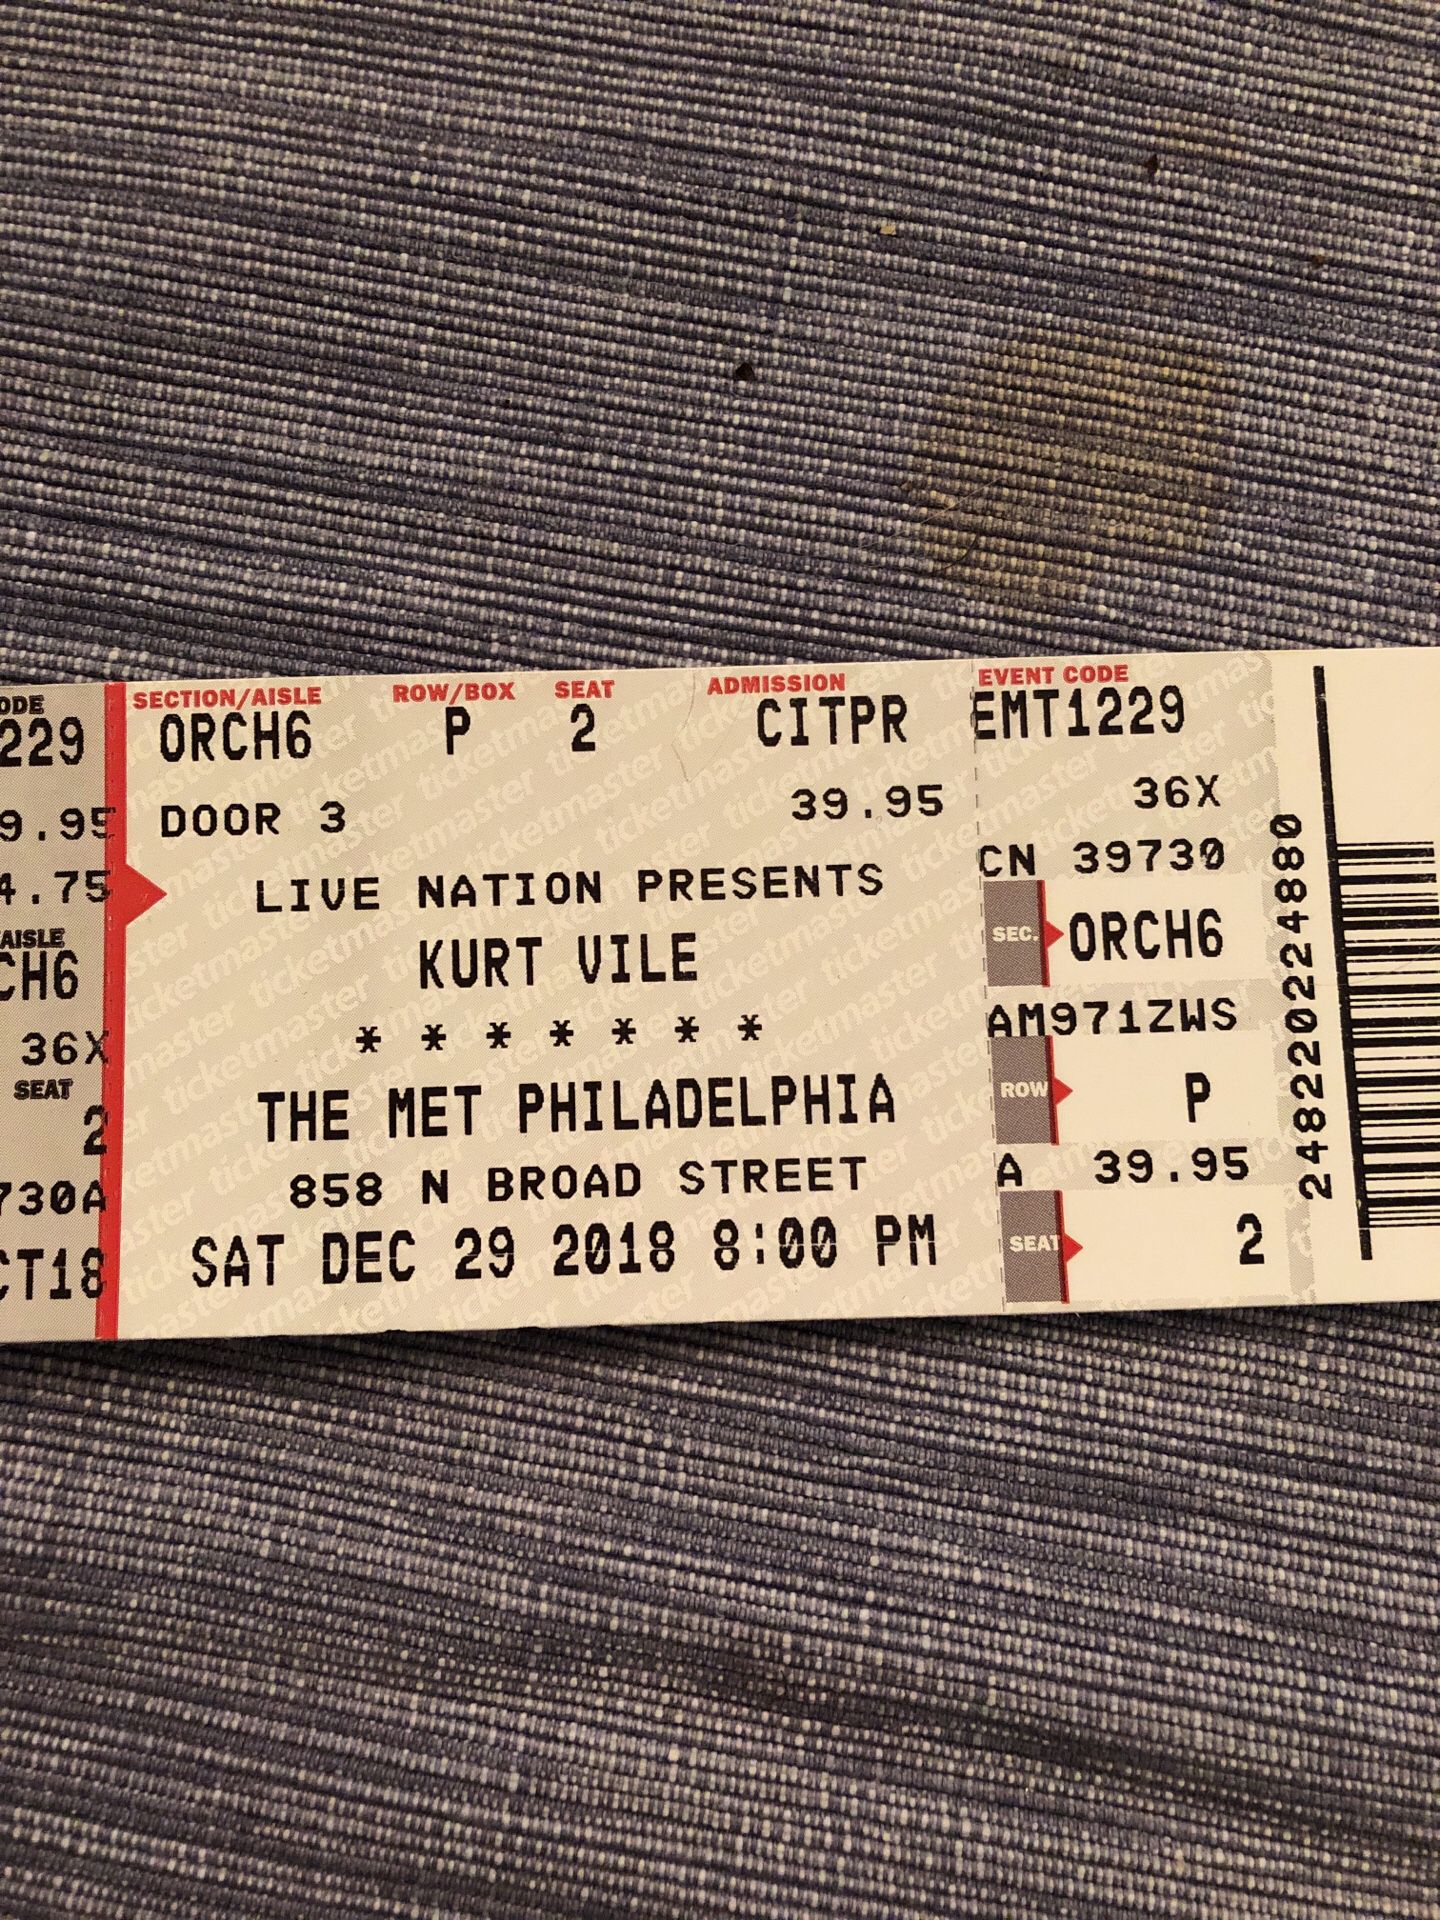 12/29 Kurt Vile @ the Met in Philly (Orch6 Row P Seats 1&2)